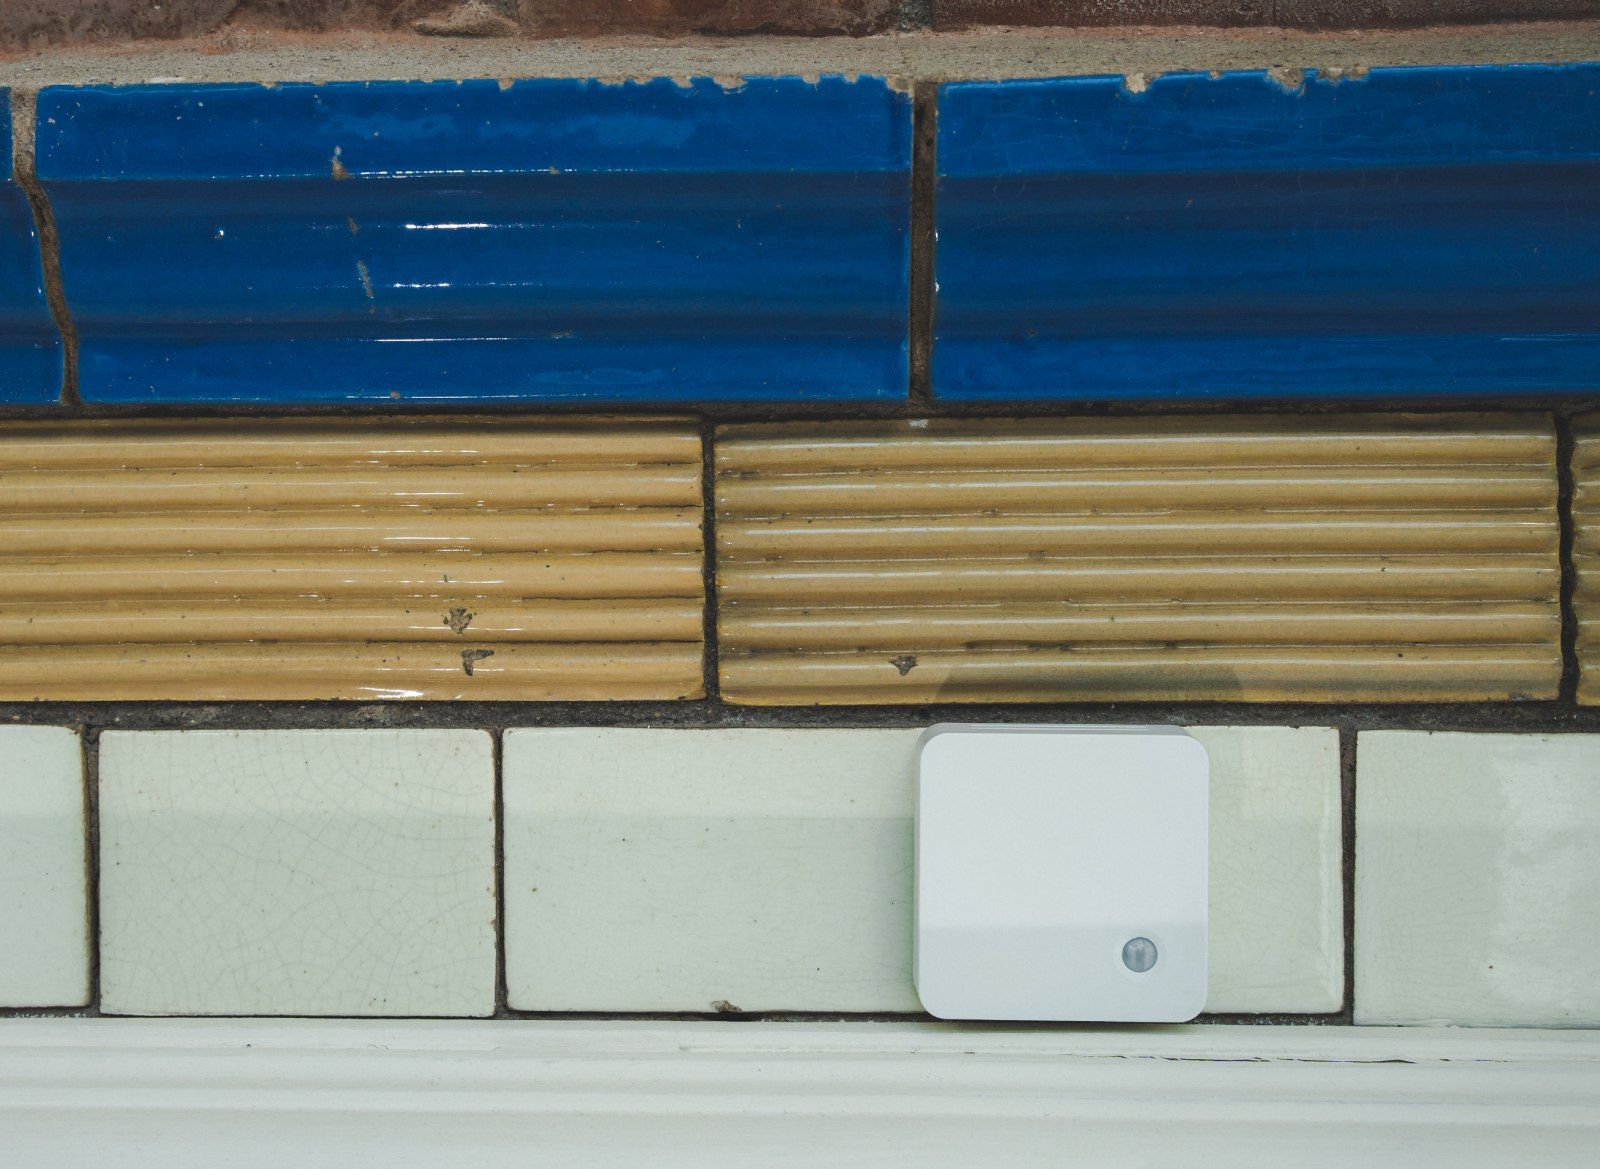 Image of the SmartWorkPlus Environment Sensor on a tiled wall